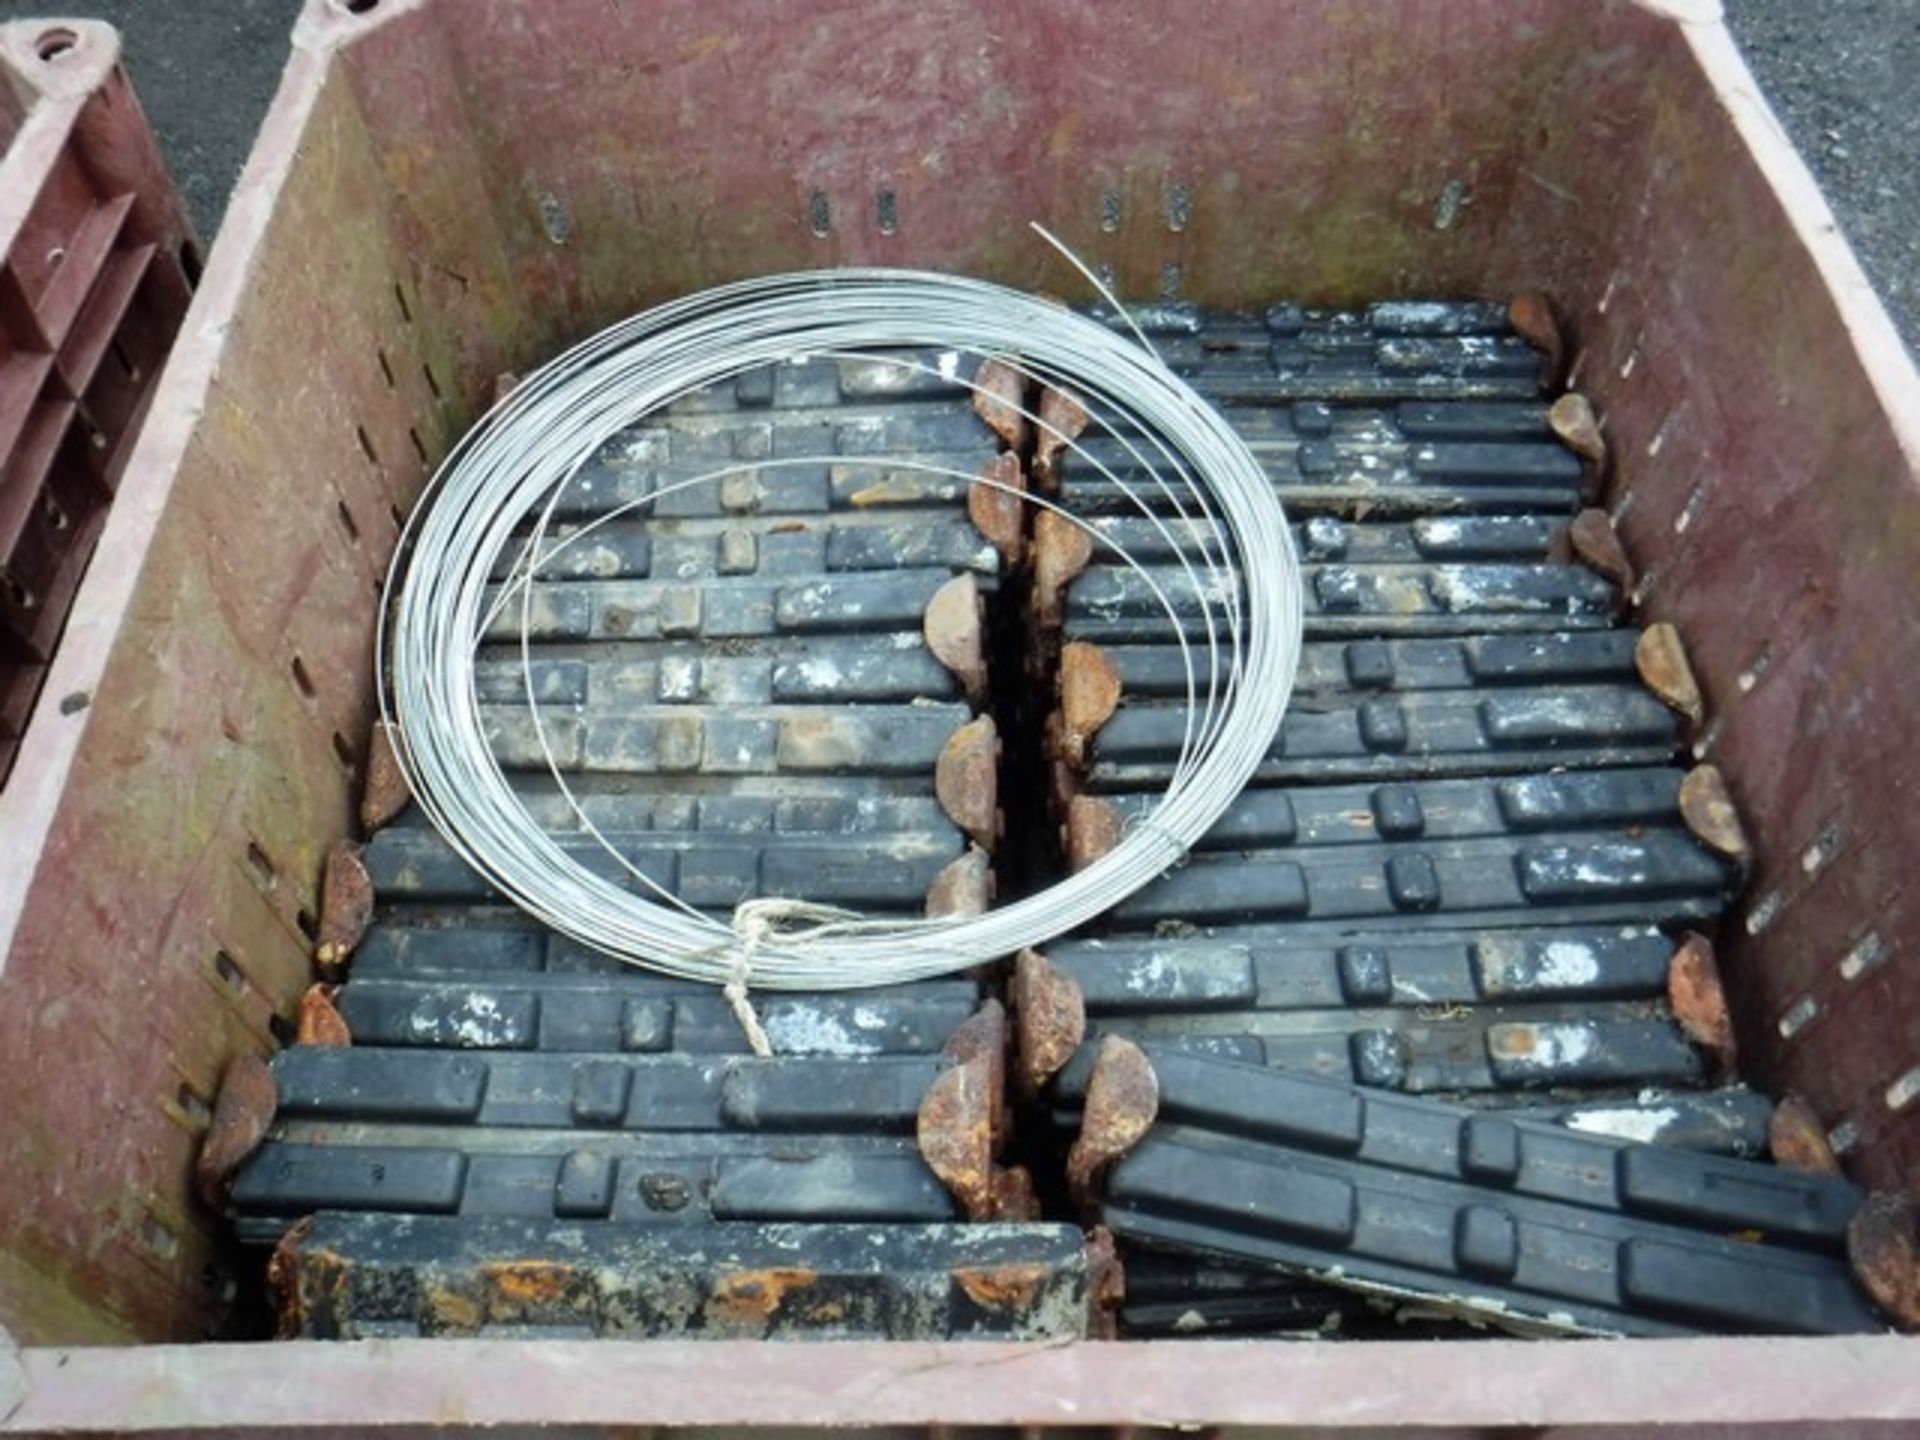 BOX OF USED TRACK PADS FOR EXCAVATORS